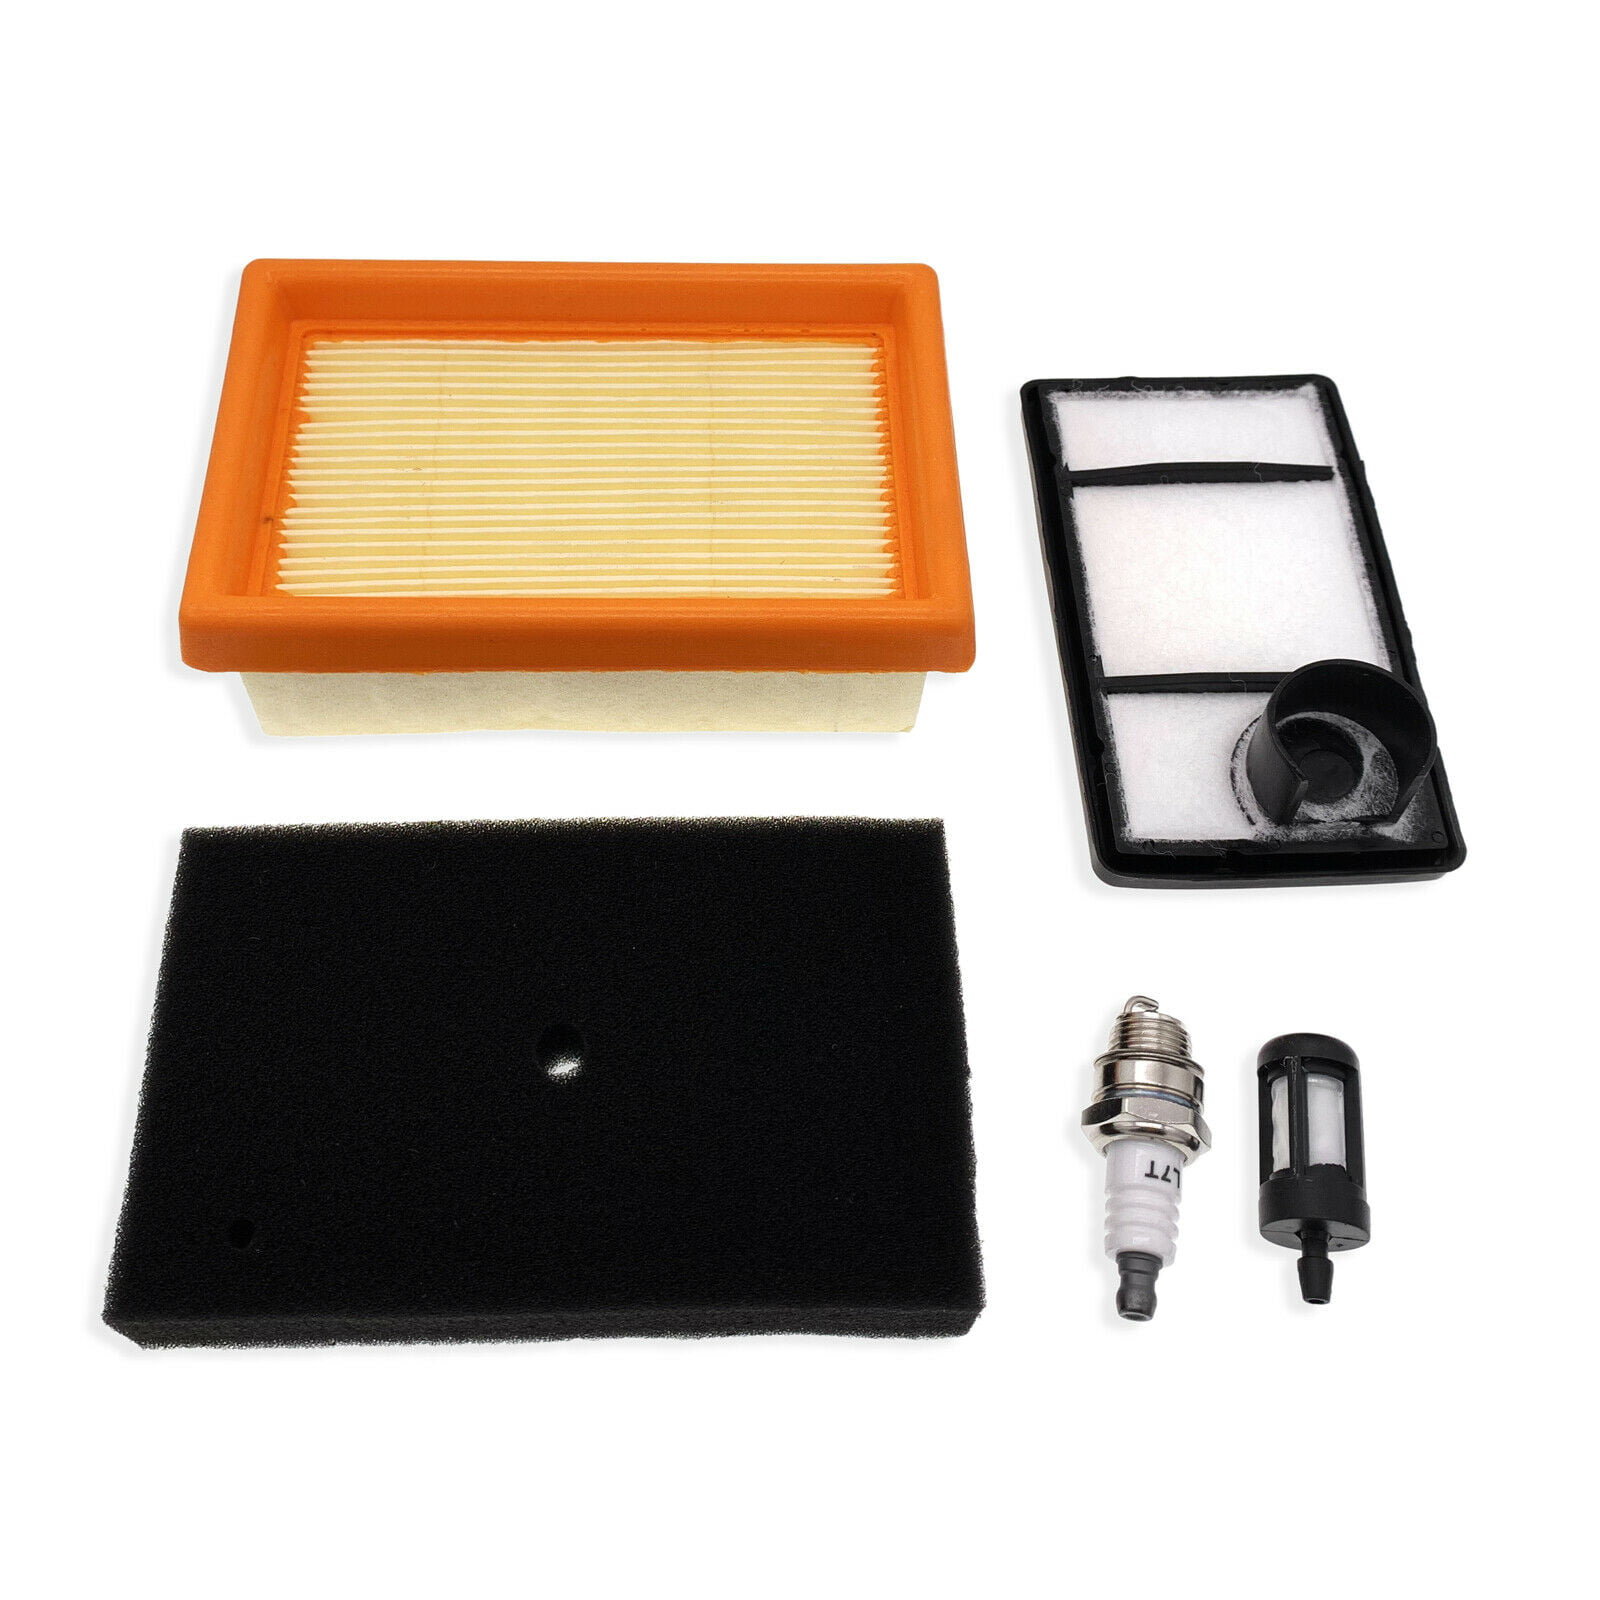 Air Filter Tune Up Kit for Stihl TS400 TS 400 Concrete Cut Off Saw 4223 140 1800 